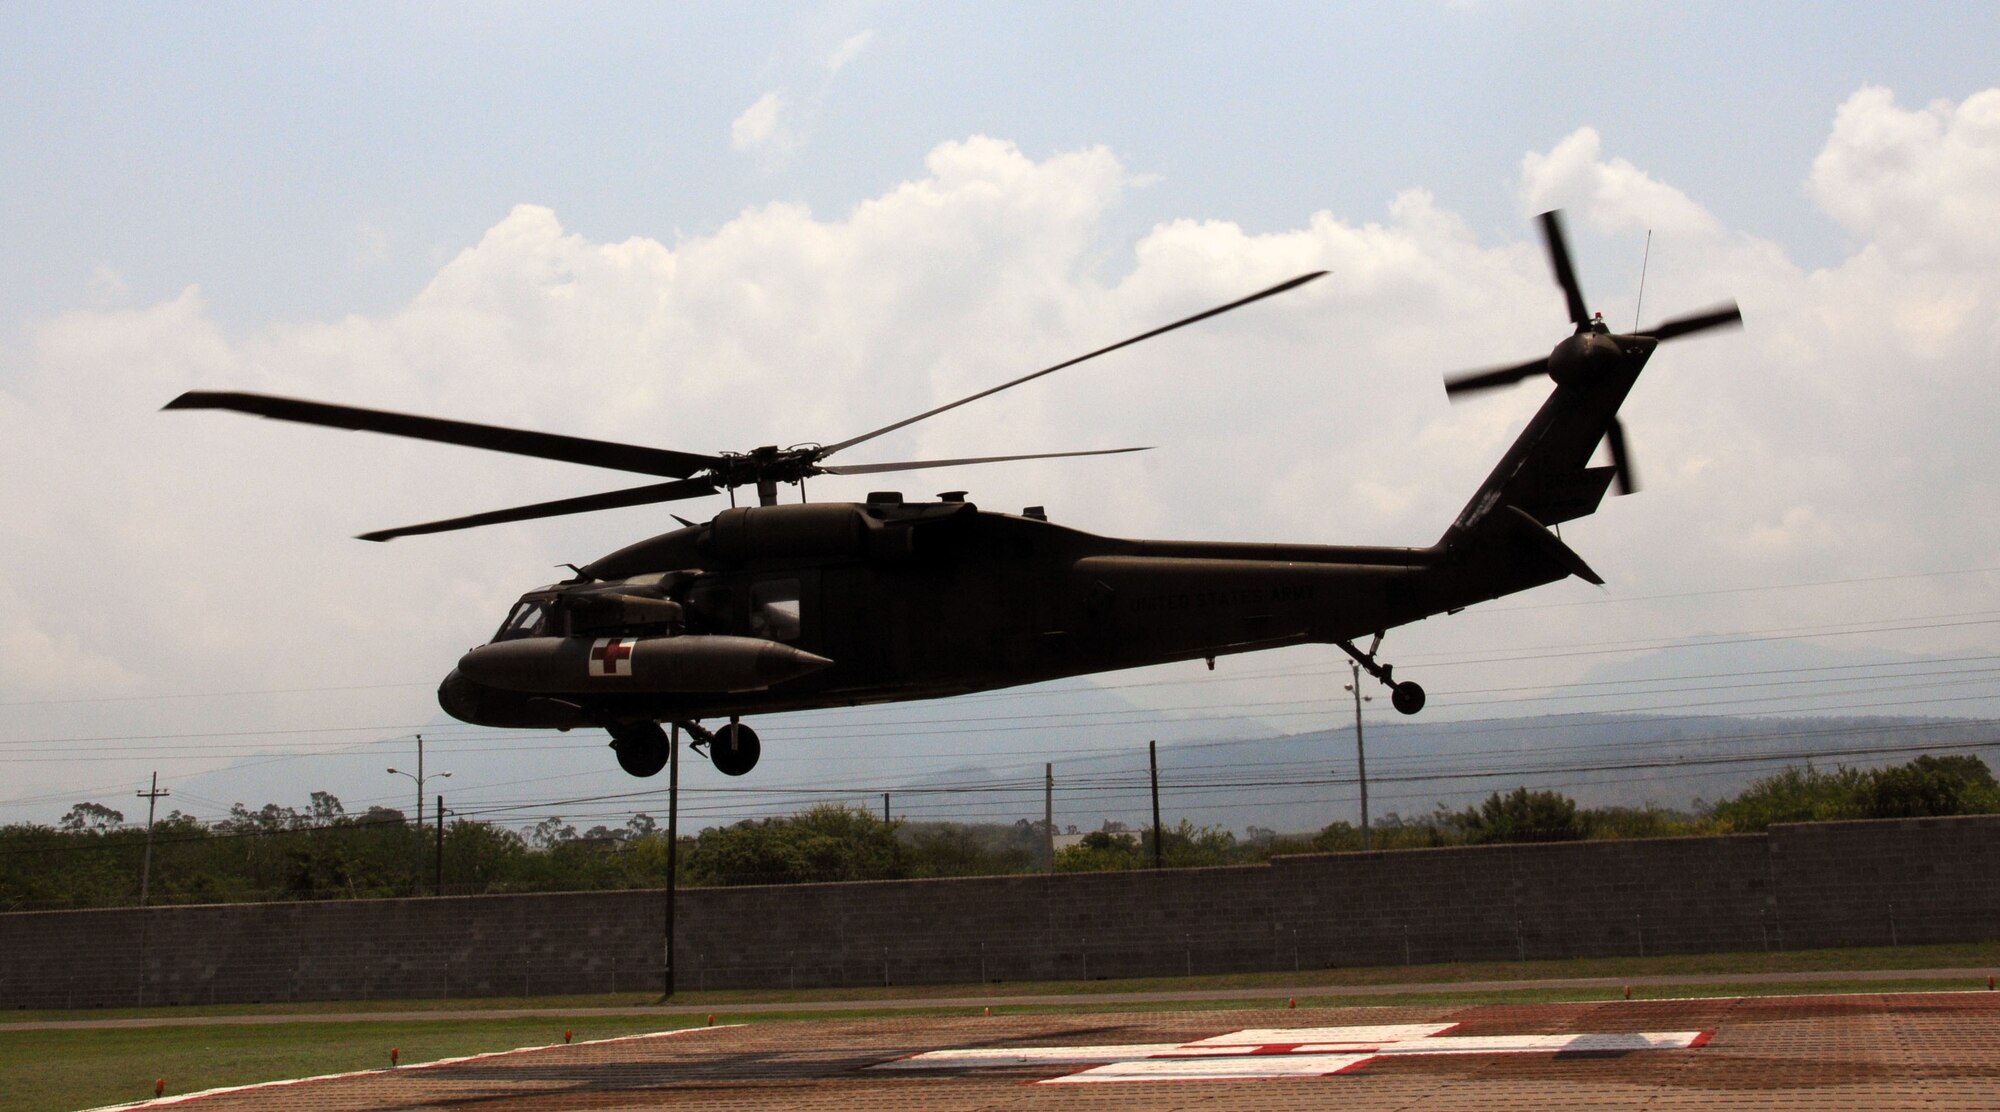 A U. S. Army UH-60 Blackhawk MEDEVAC helicopter takes off from the Joint Task Force- Bravo Medical Element's helicopter pad at Soto Cano Air Base to transport an automobile accident victim to the Hospital Militar in Tegucigalpa, Honduras, May 13, 2014, in response to a Honduran government request for a medical evacuation (MEDEVAC).  A vehicle traveling west on Honduras Highway CA-5 about 13 miles outside of Comayagua was struck from behind by a tractor trailer truck.  The 18-wheeler subsequently pushed the vehicle into the trailer of another tractor trailer crushing the vehicle.  (Photo by U. S. Air National Guard Capt. Steven Stubbs)